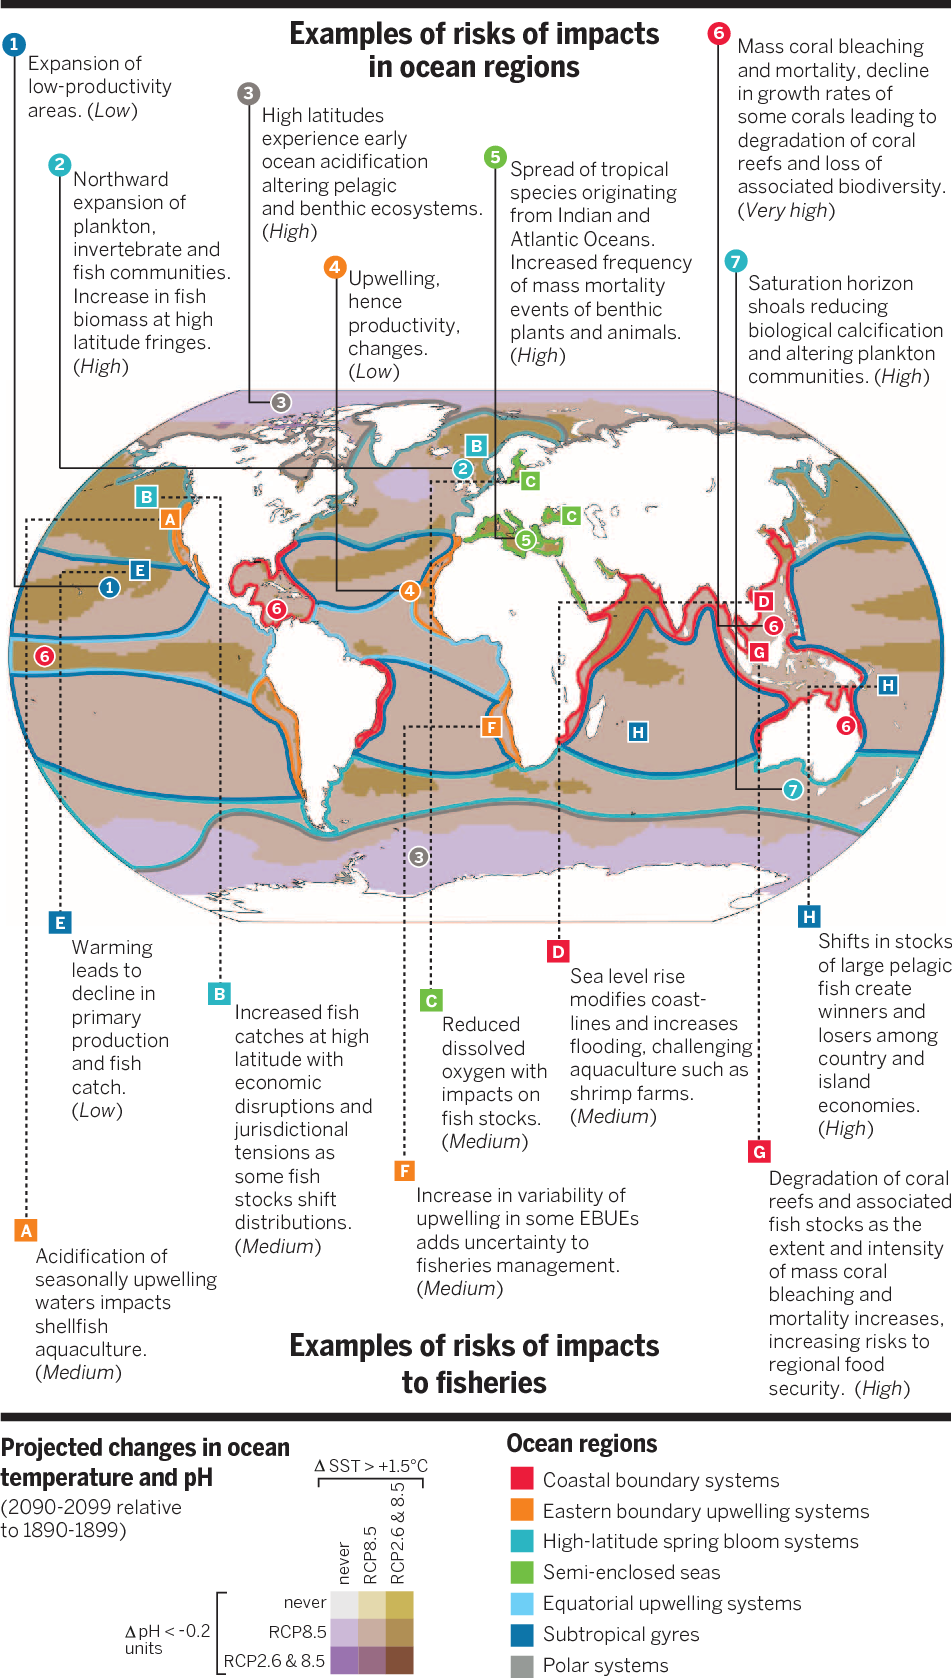 Example of risks of impacts in ocean regions, developing nations will be most impacted